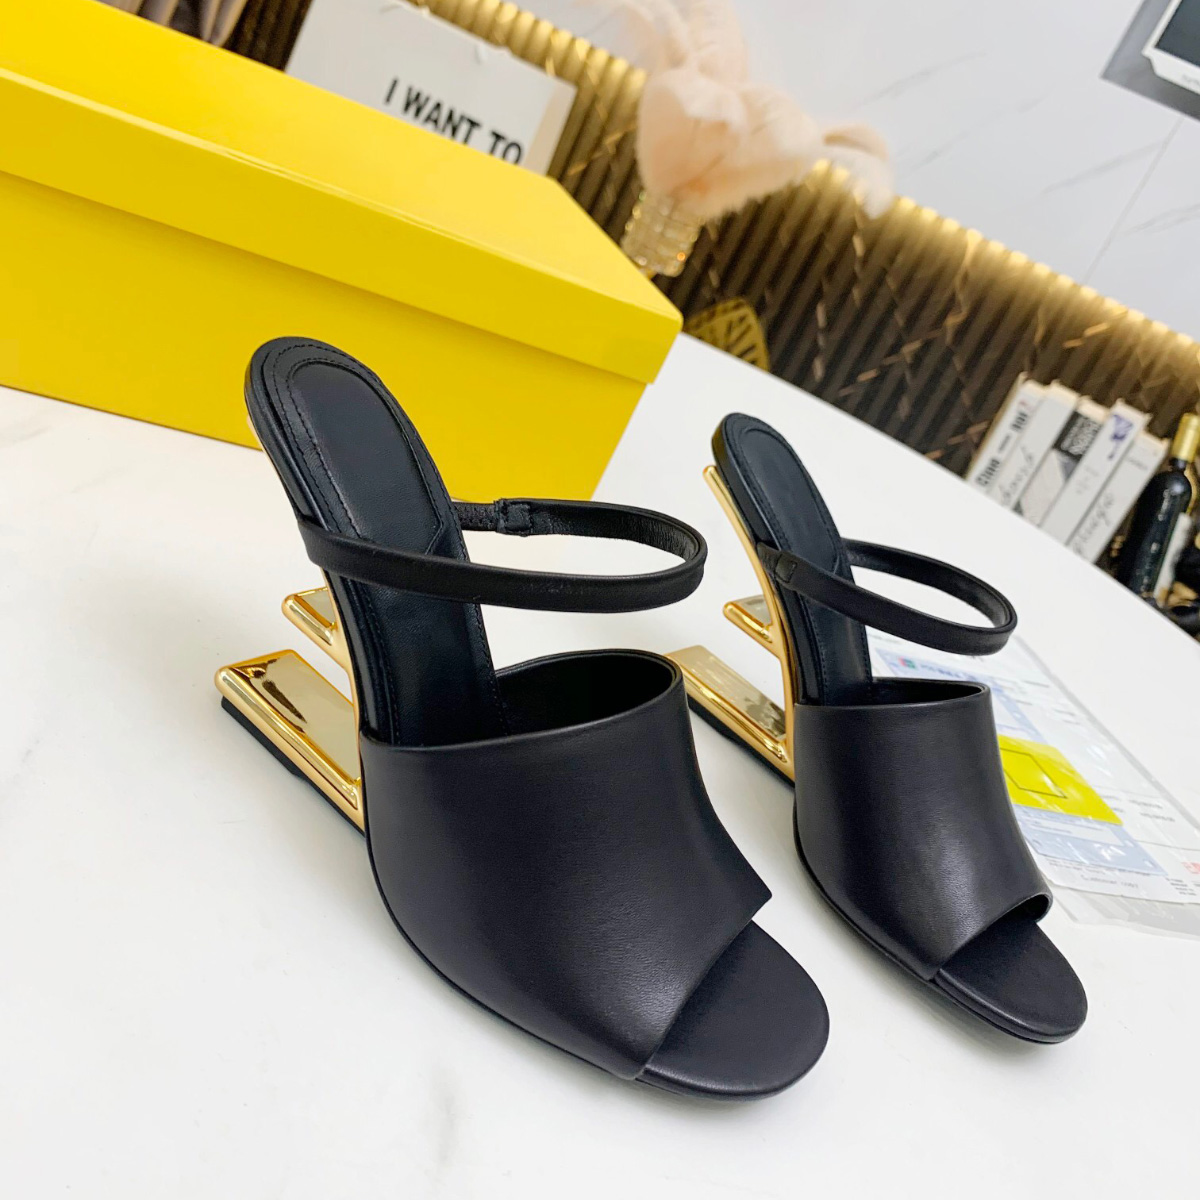 

Black Sculpted high-heeled slippers Metallic high heels open toes slip-on slides calfskin leather outsole sandals for women luxury designer shoes factory footwear